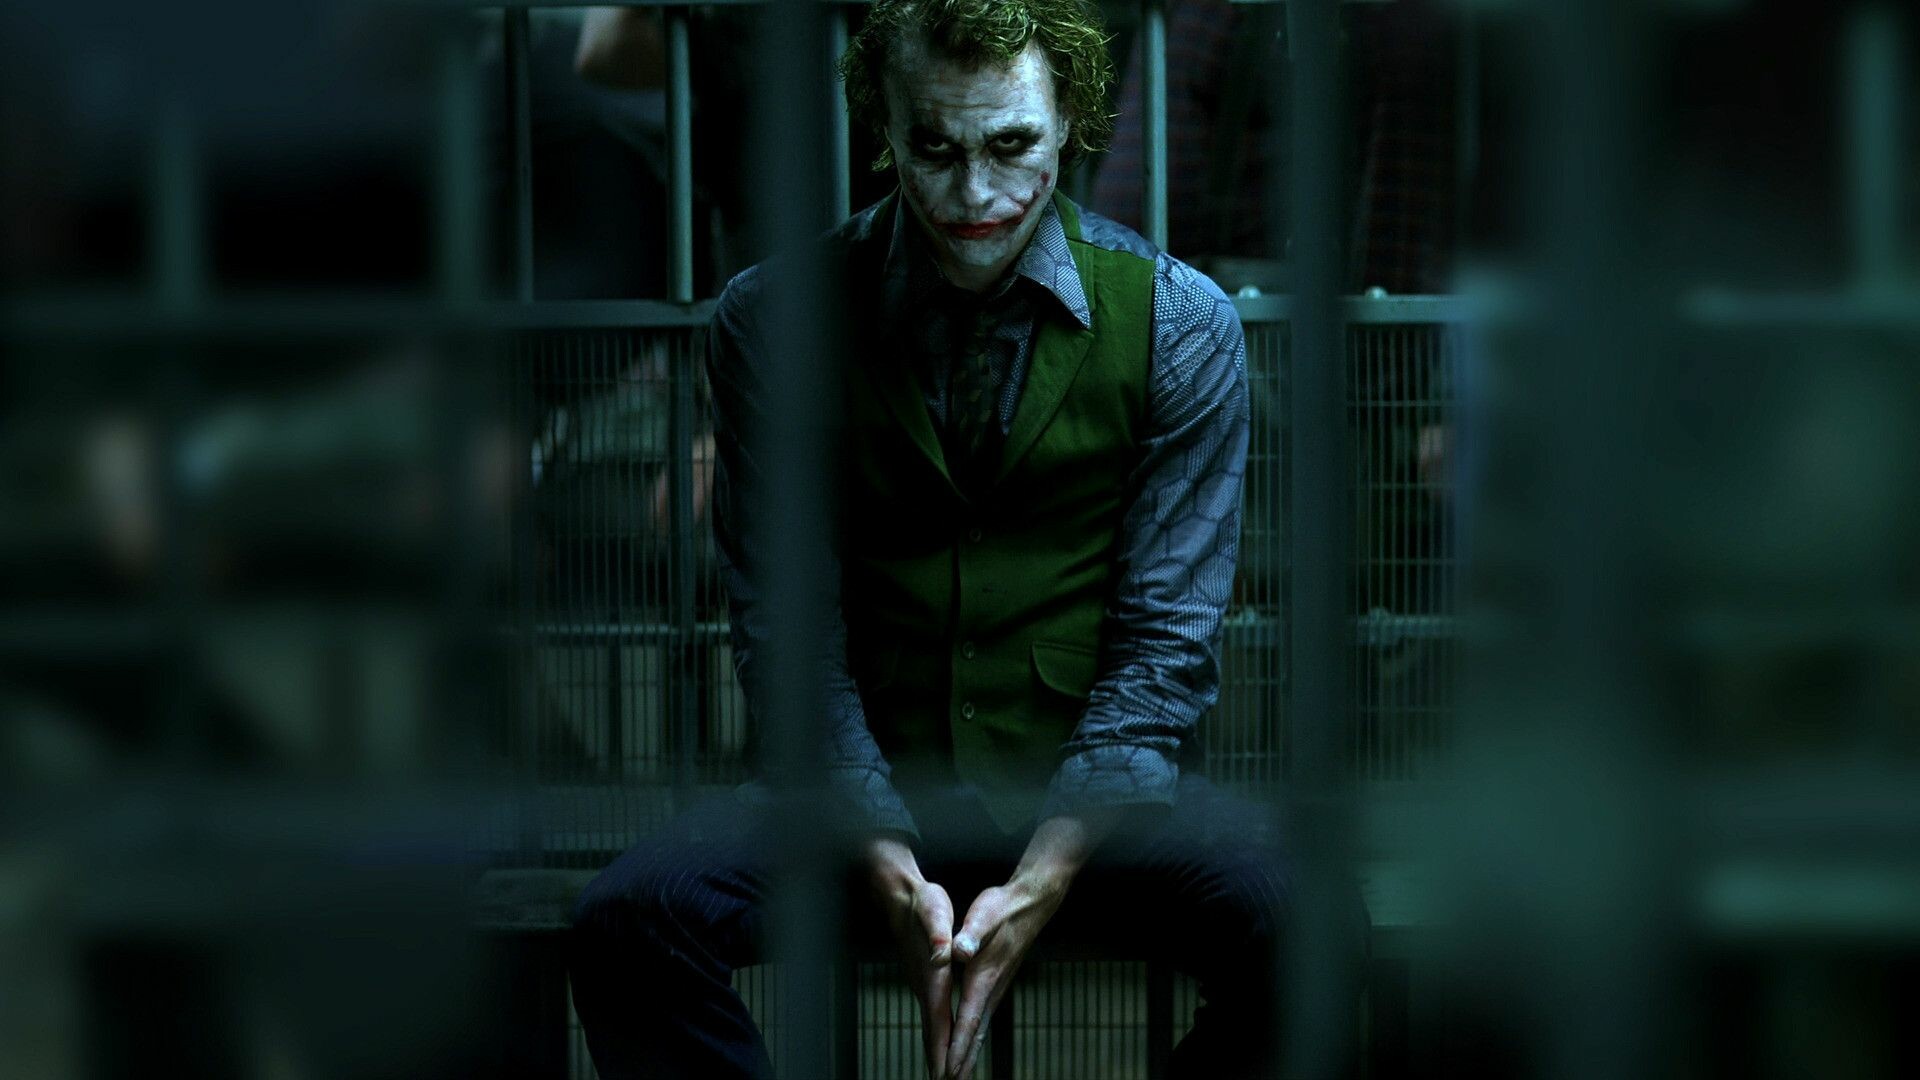 The Dark Knight: Heath Ledger as the Joker, a criminal who is determined to sow chaos and corruption throughout Gotham. 1920x1080 Full HD Background.